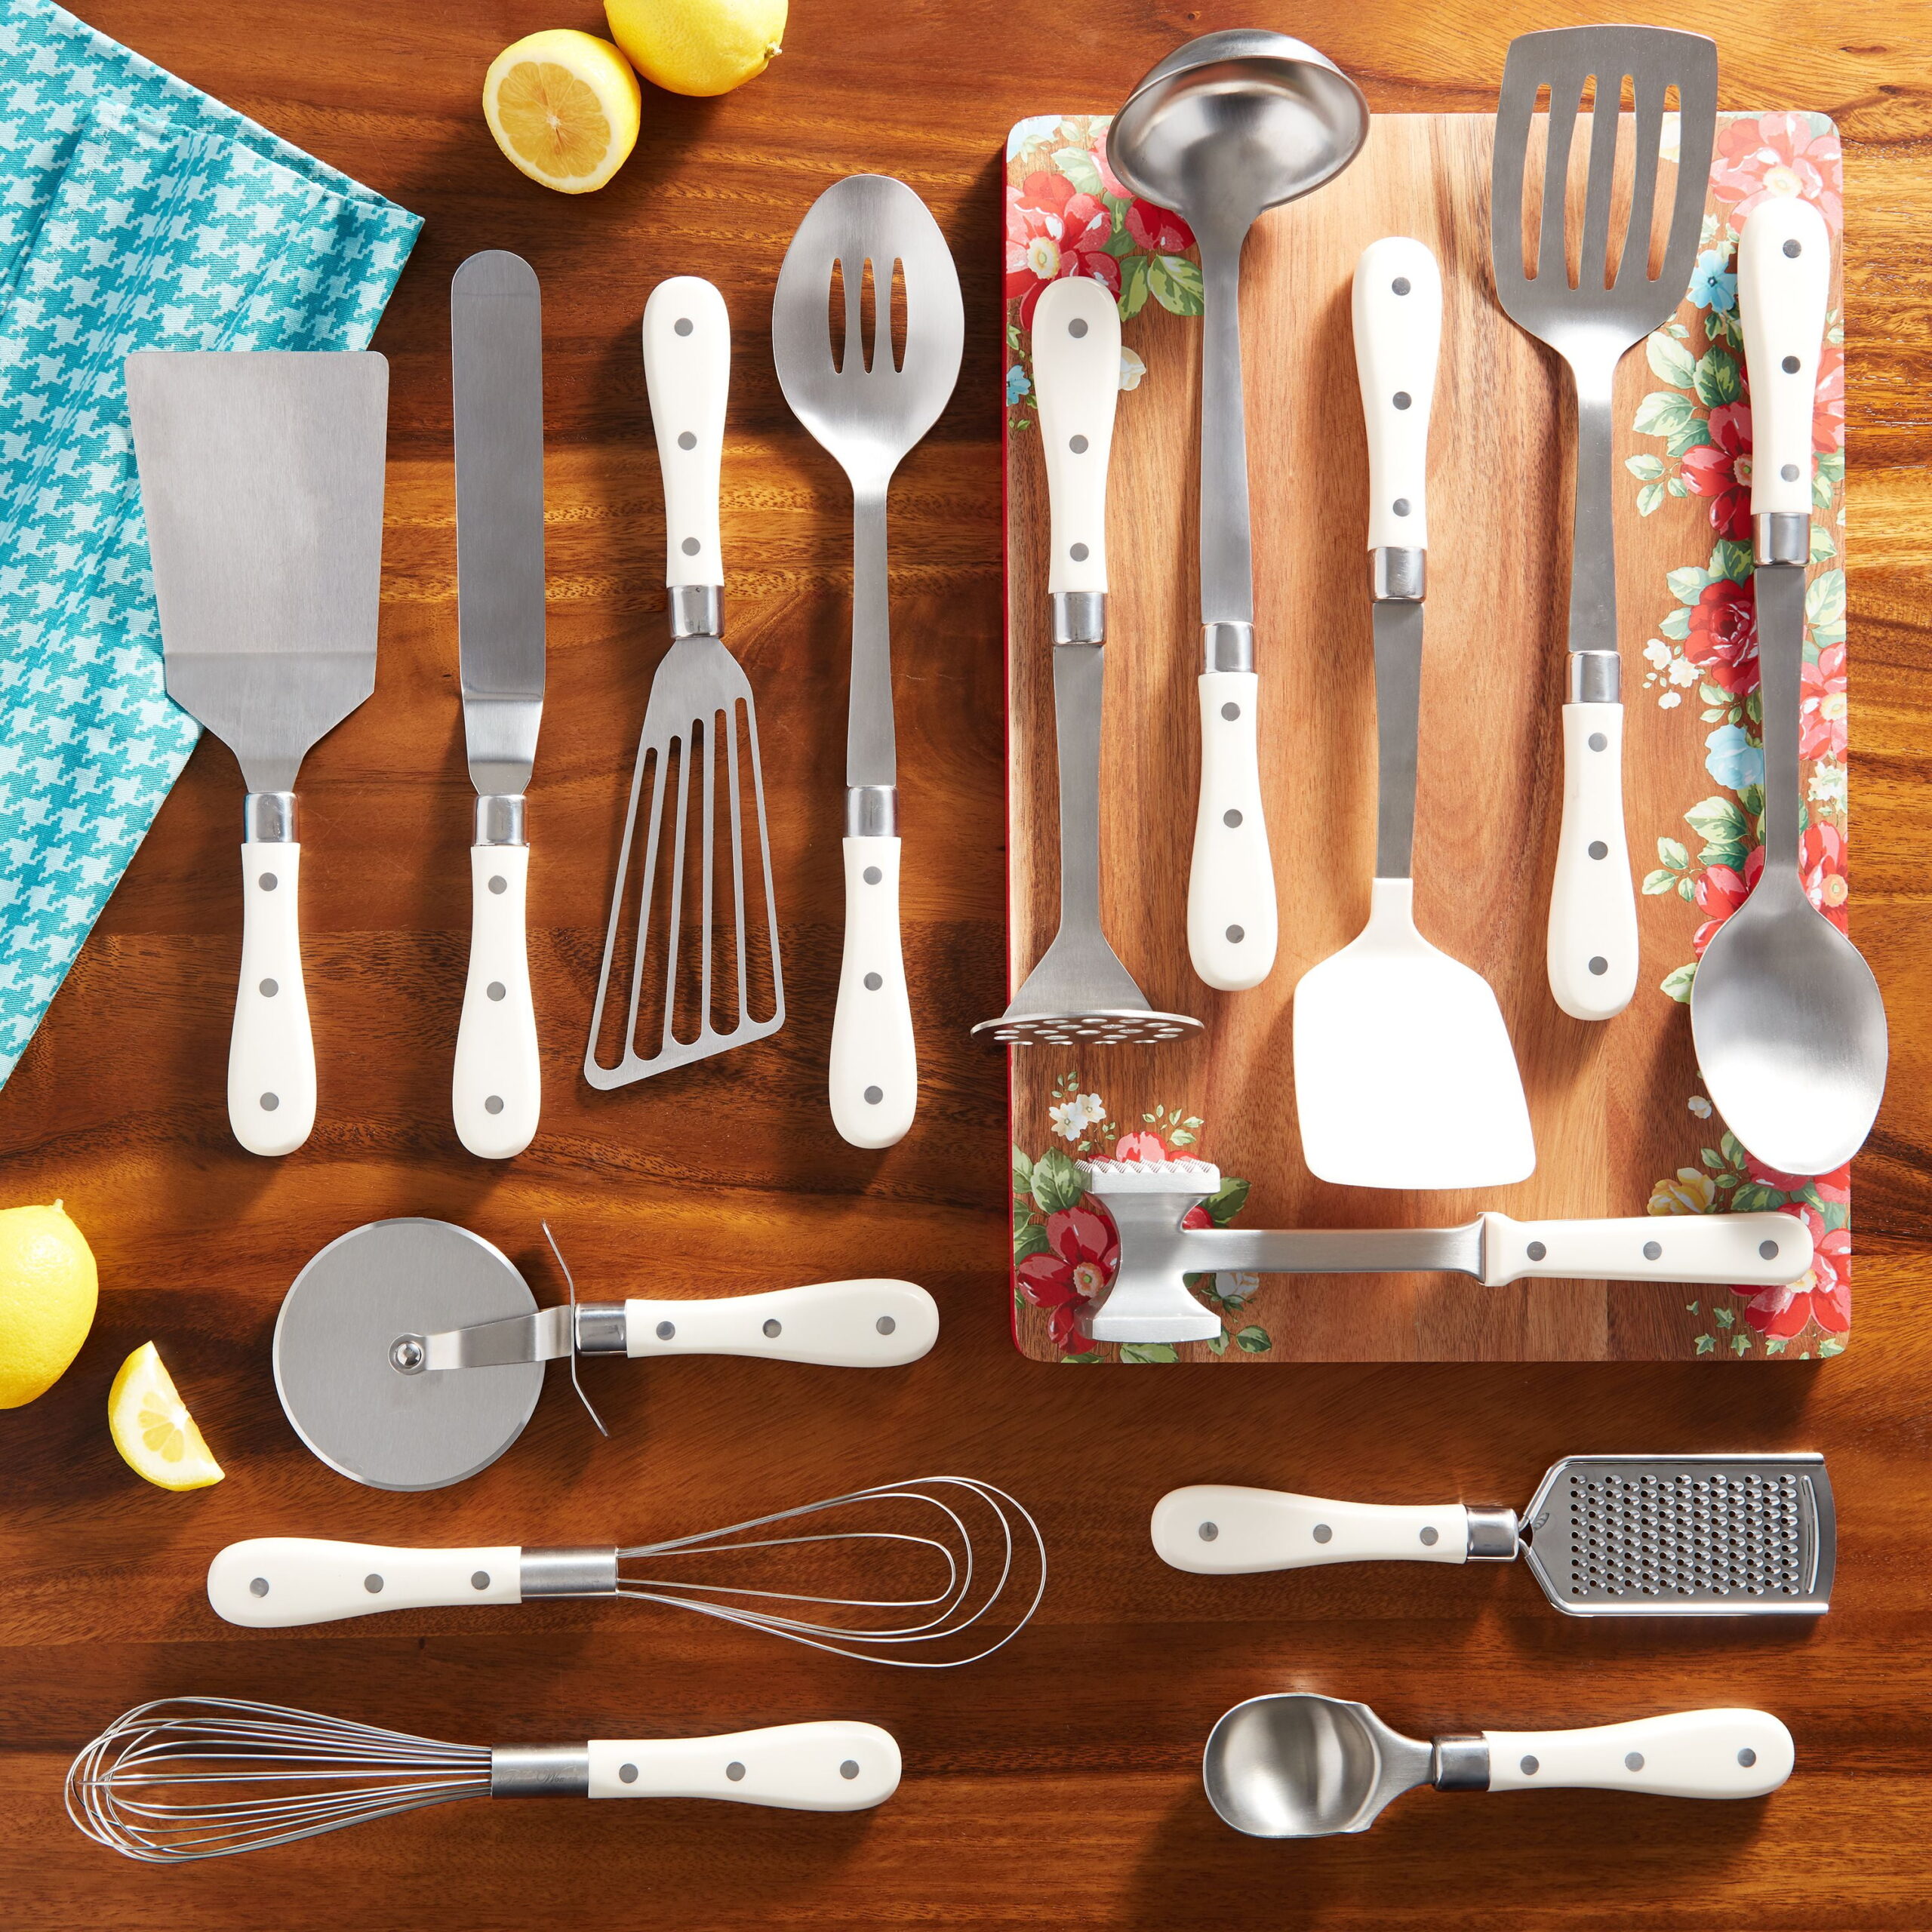 https://bigbigmart.com/wp-content/uploads/2023/12/The-Pioneer-Woman-Frontier-Collection-White-15-Piece-All-in-One-Tool-and-Gadget-Set-Linen_4549f2c5-57a8-4e9c-ab0a-48eb96c86ae8_4.5cb028e9c3c0c6797075ed87e4699475-scaled.jpeg